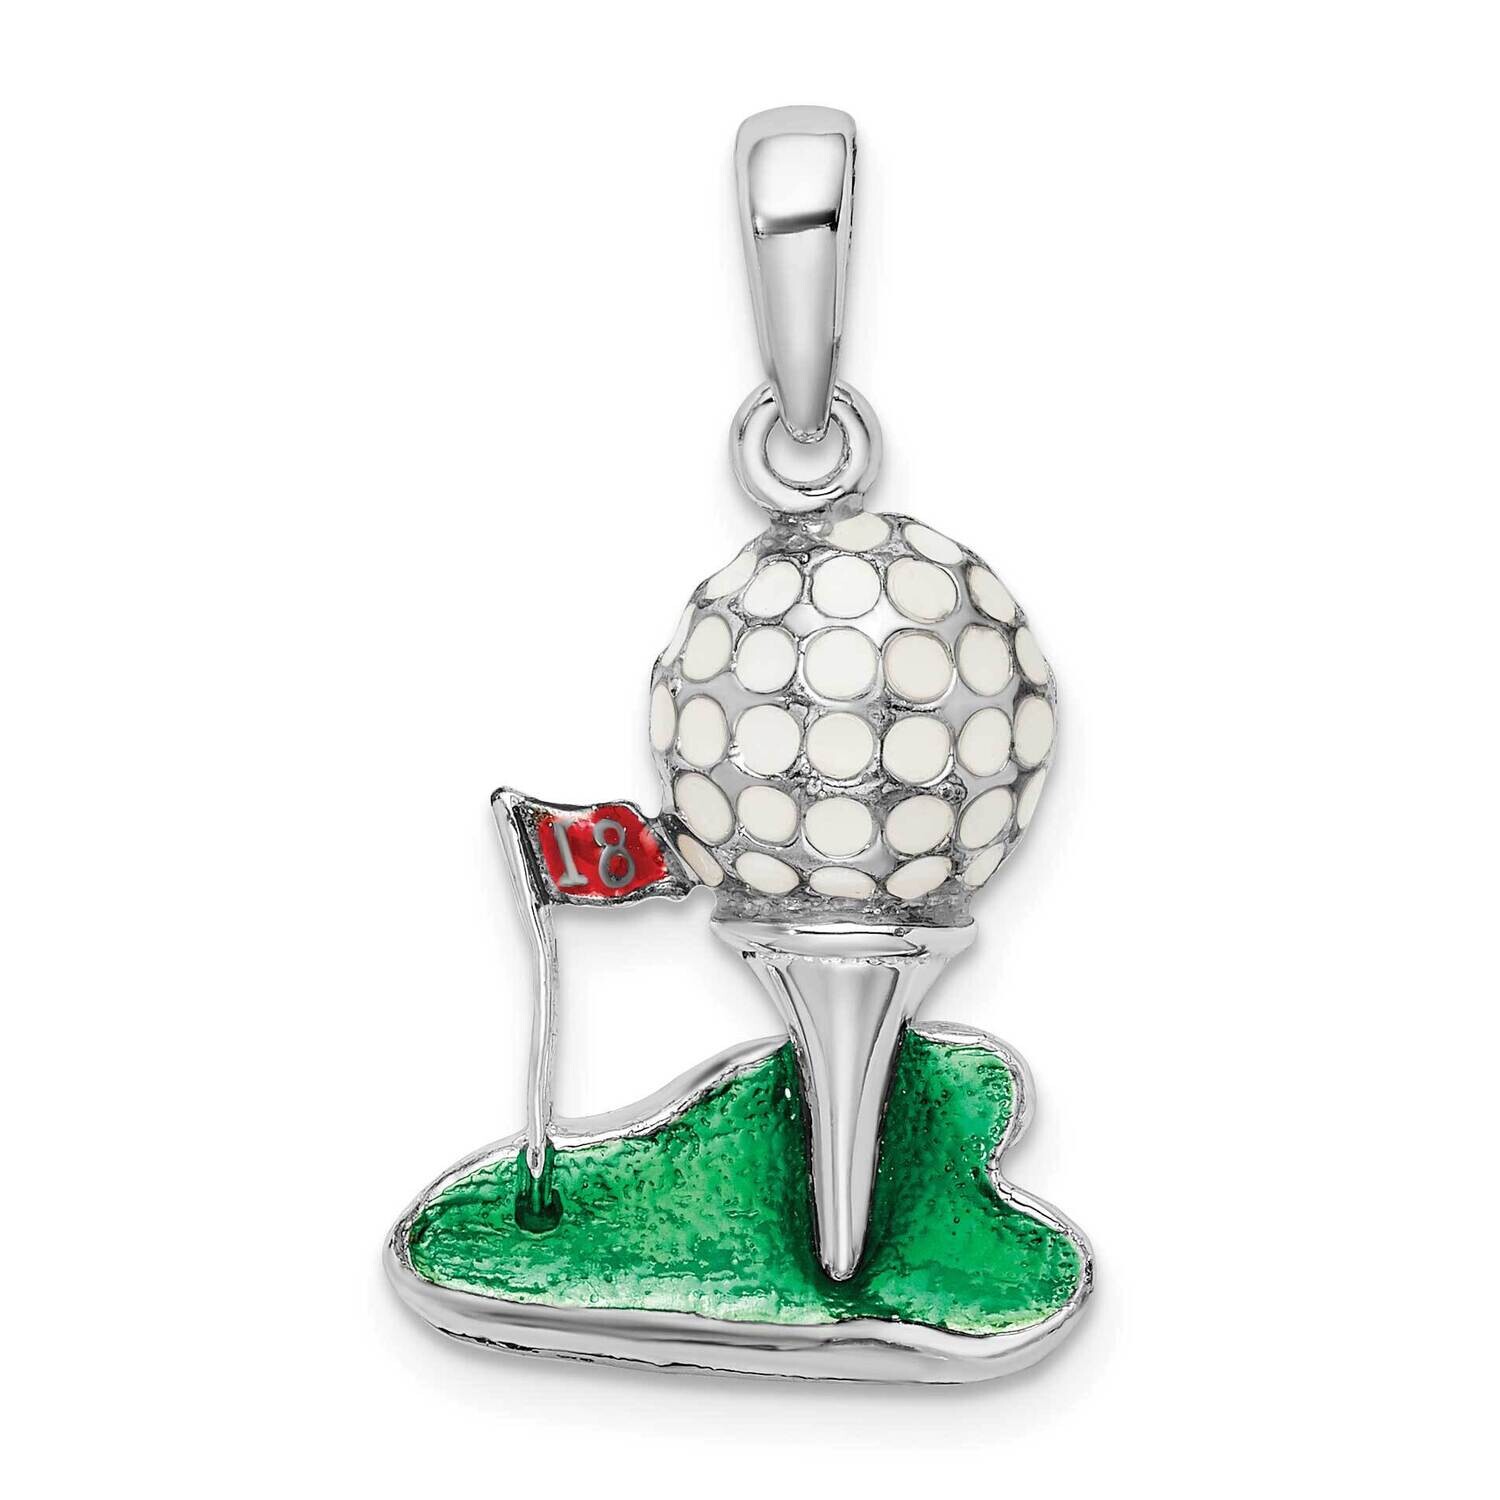 Enameled Golf Ball On Tee Pendant Sterling Silver Polished QC10687